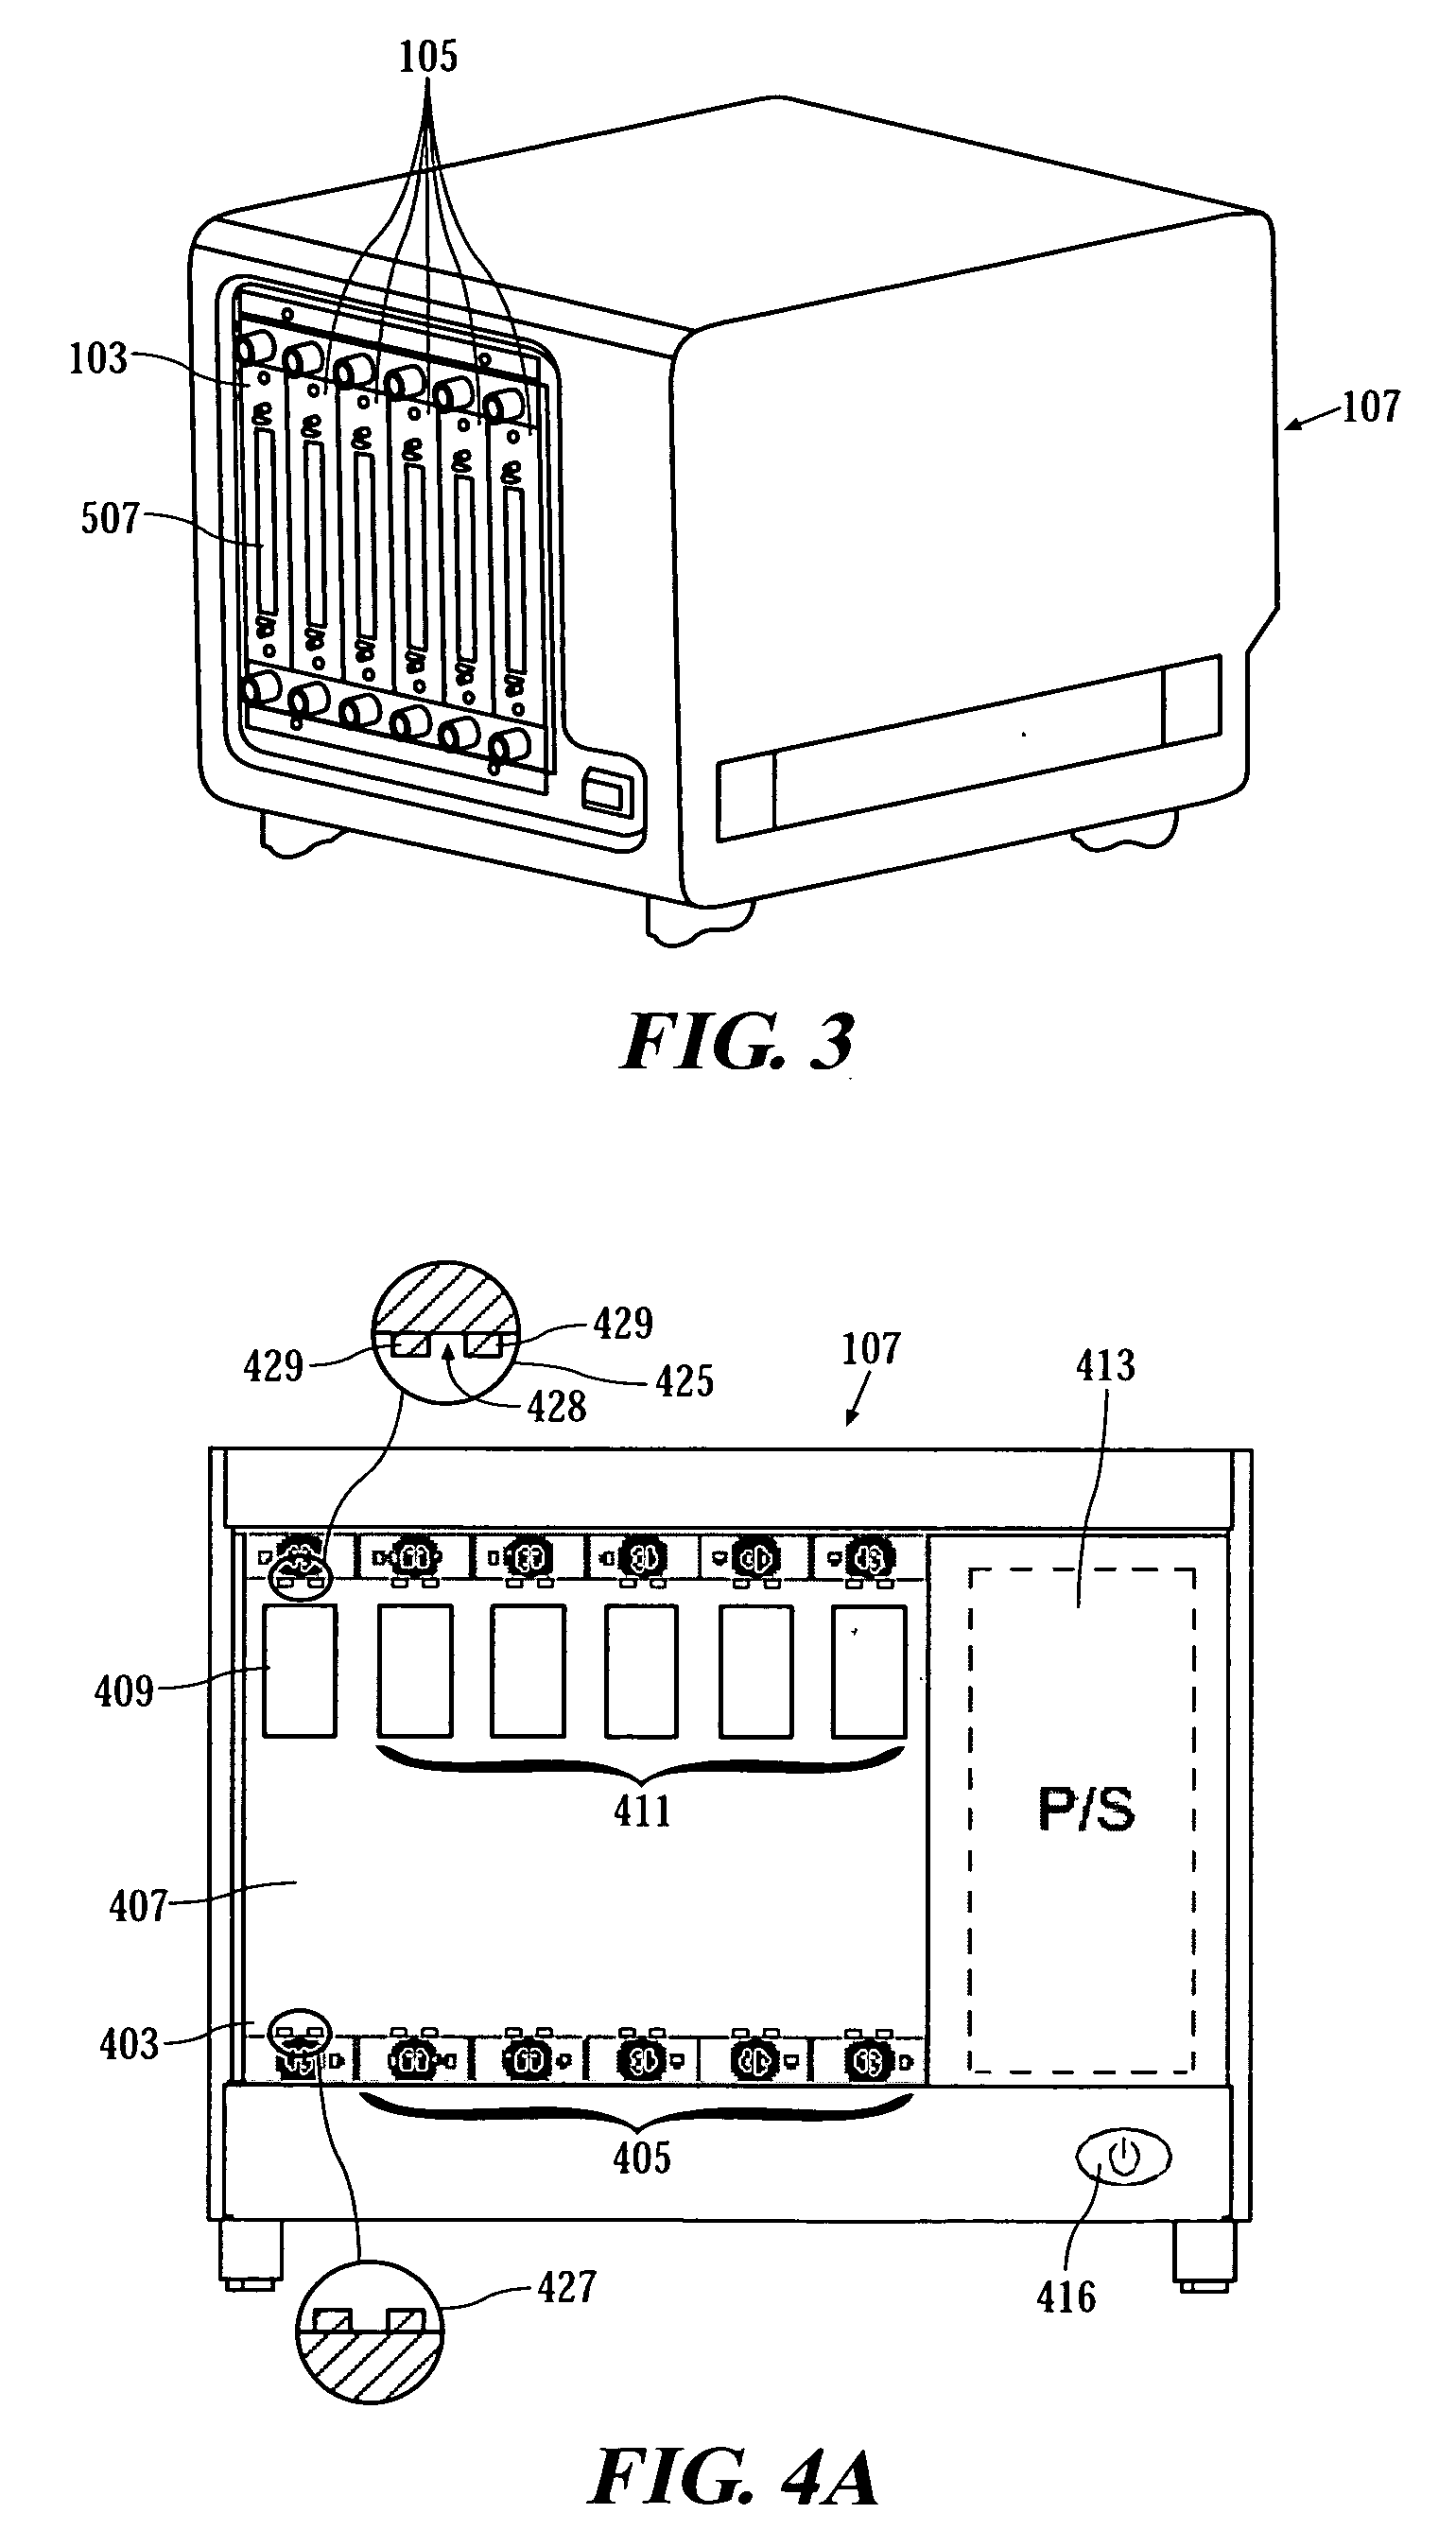 Clamshell housing for instrument modules